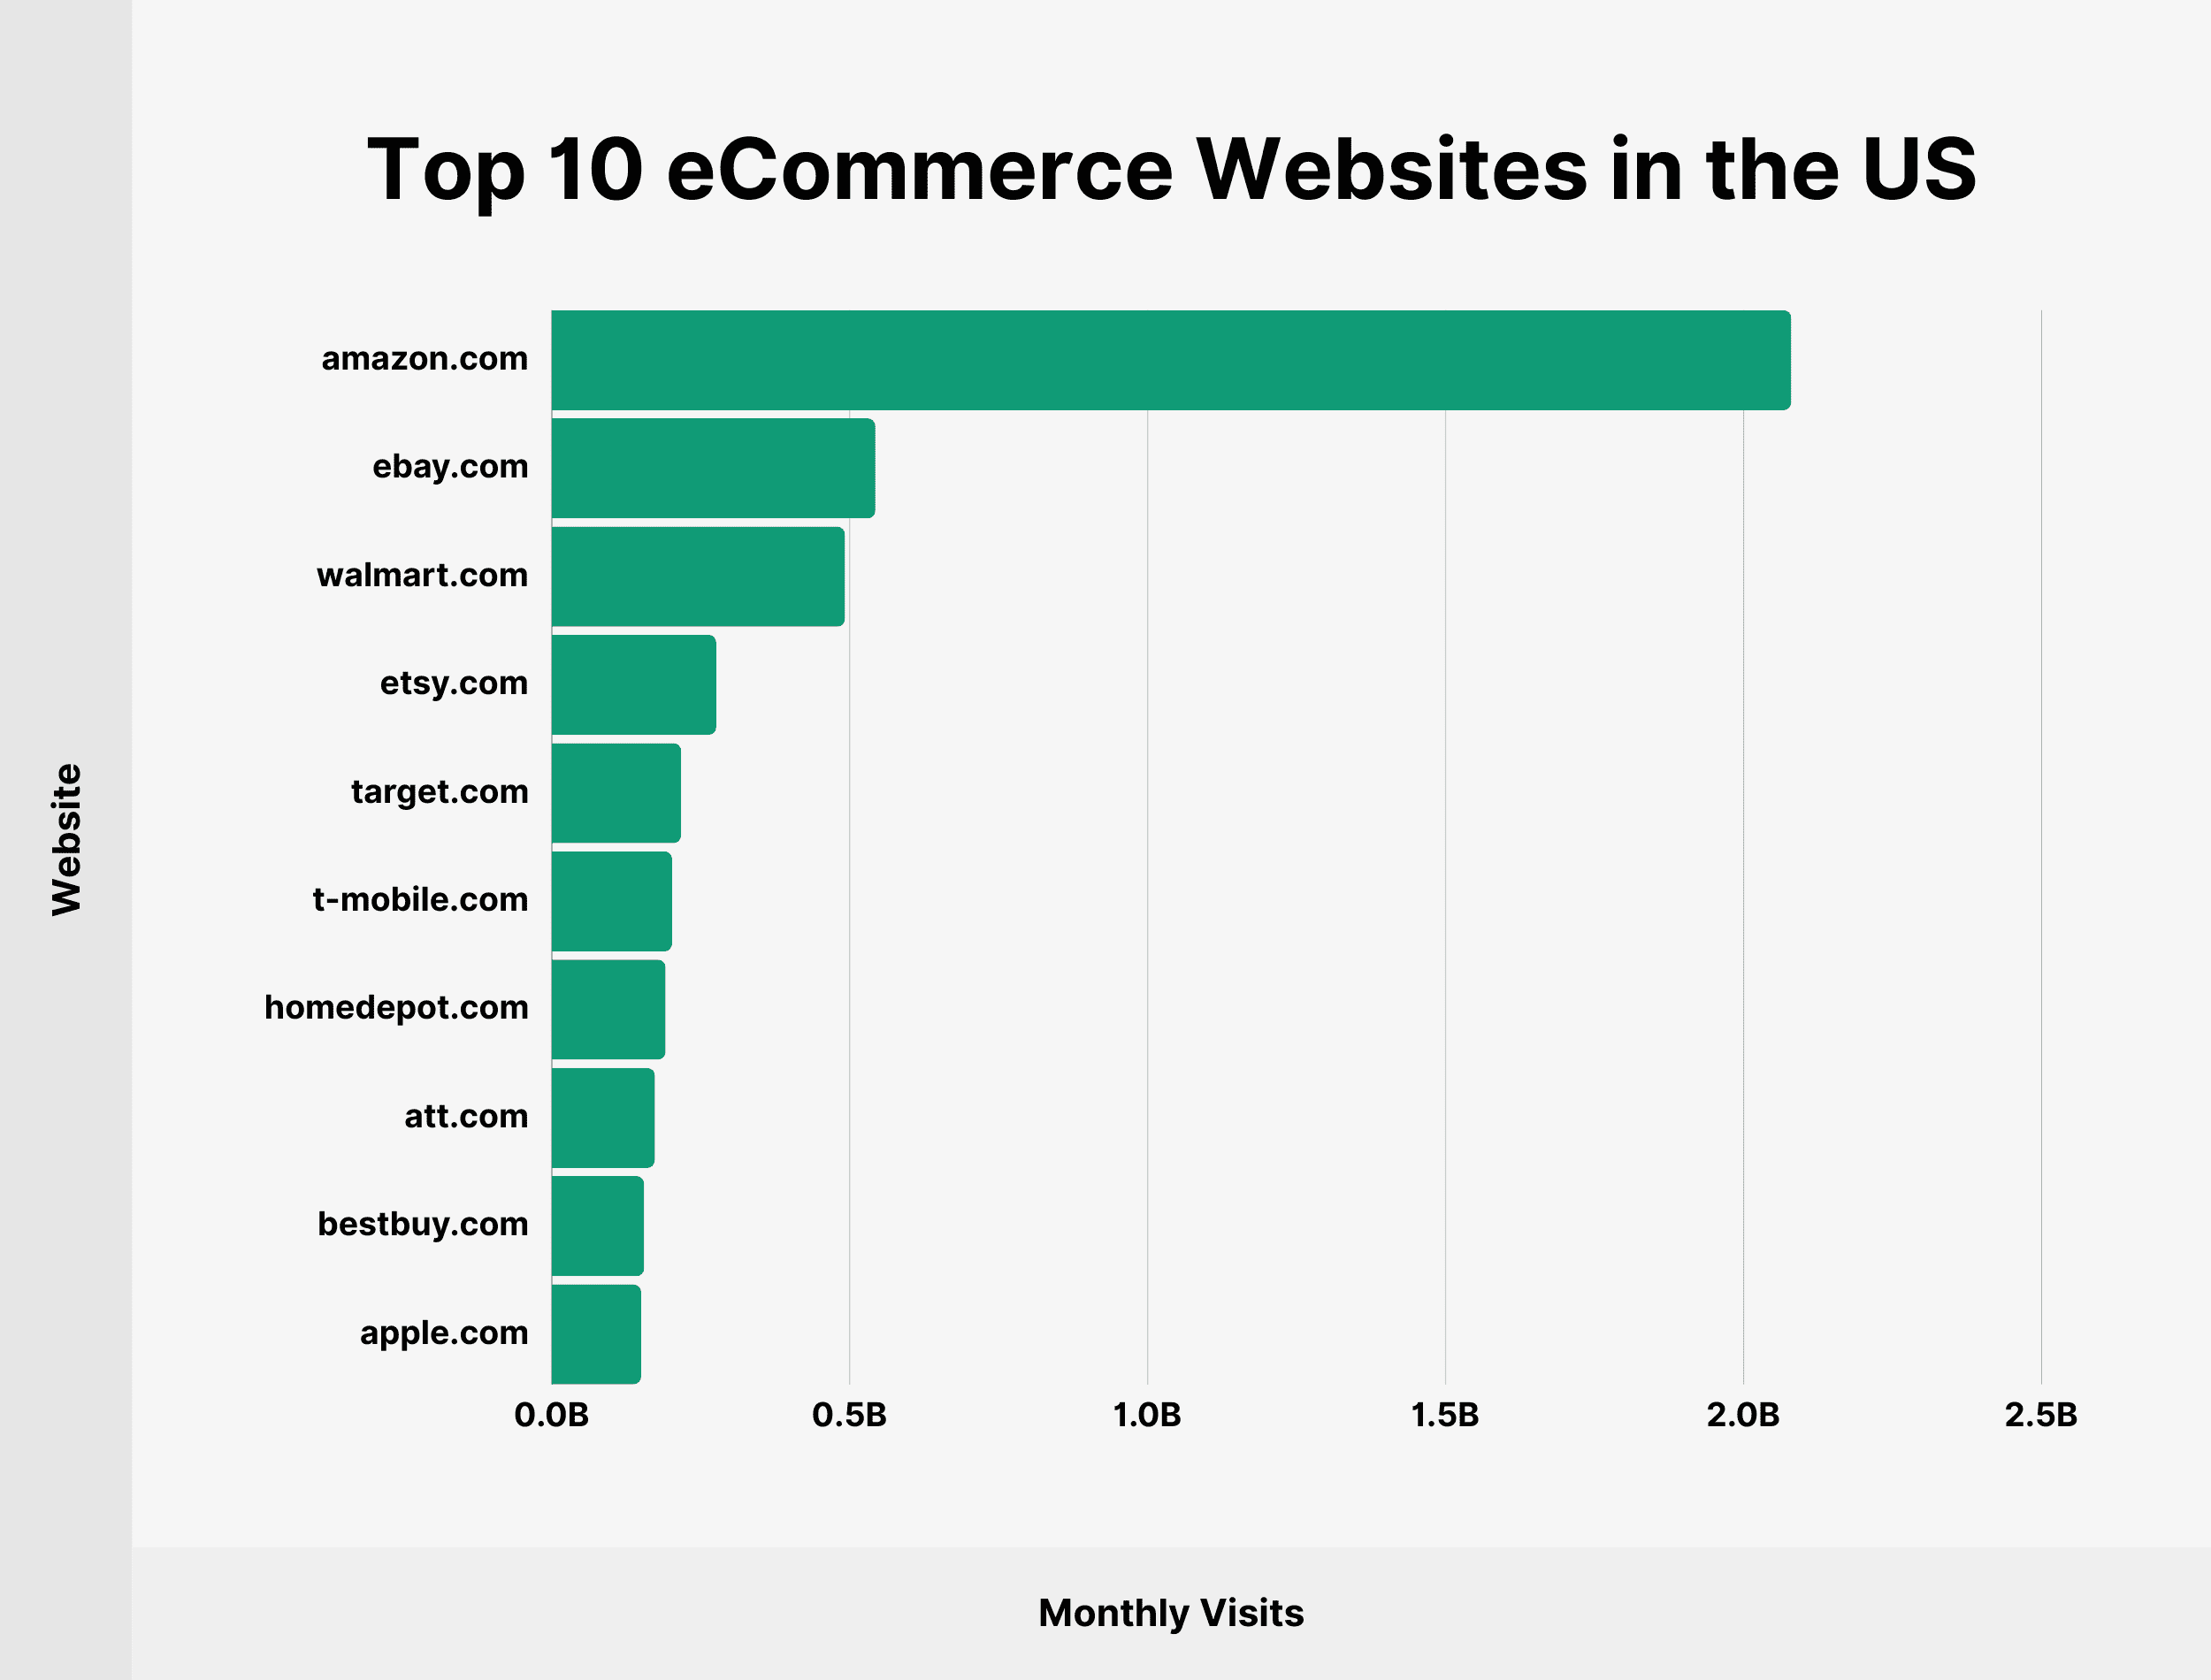 Top 10 eCommerce Websites in the US